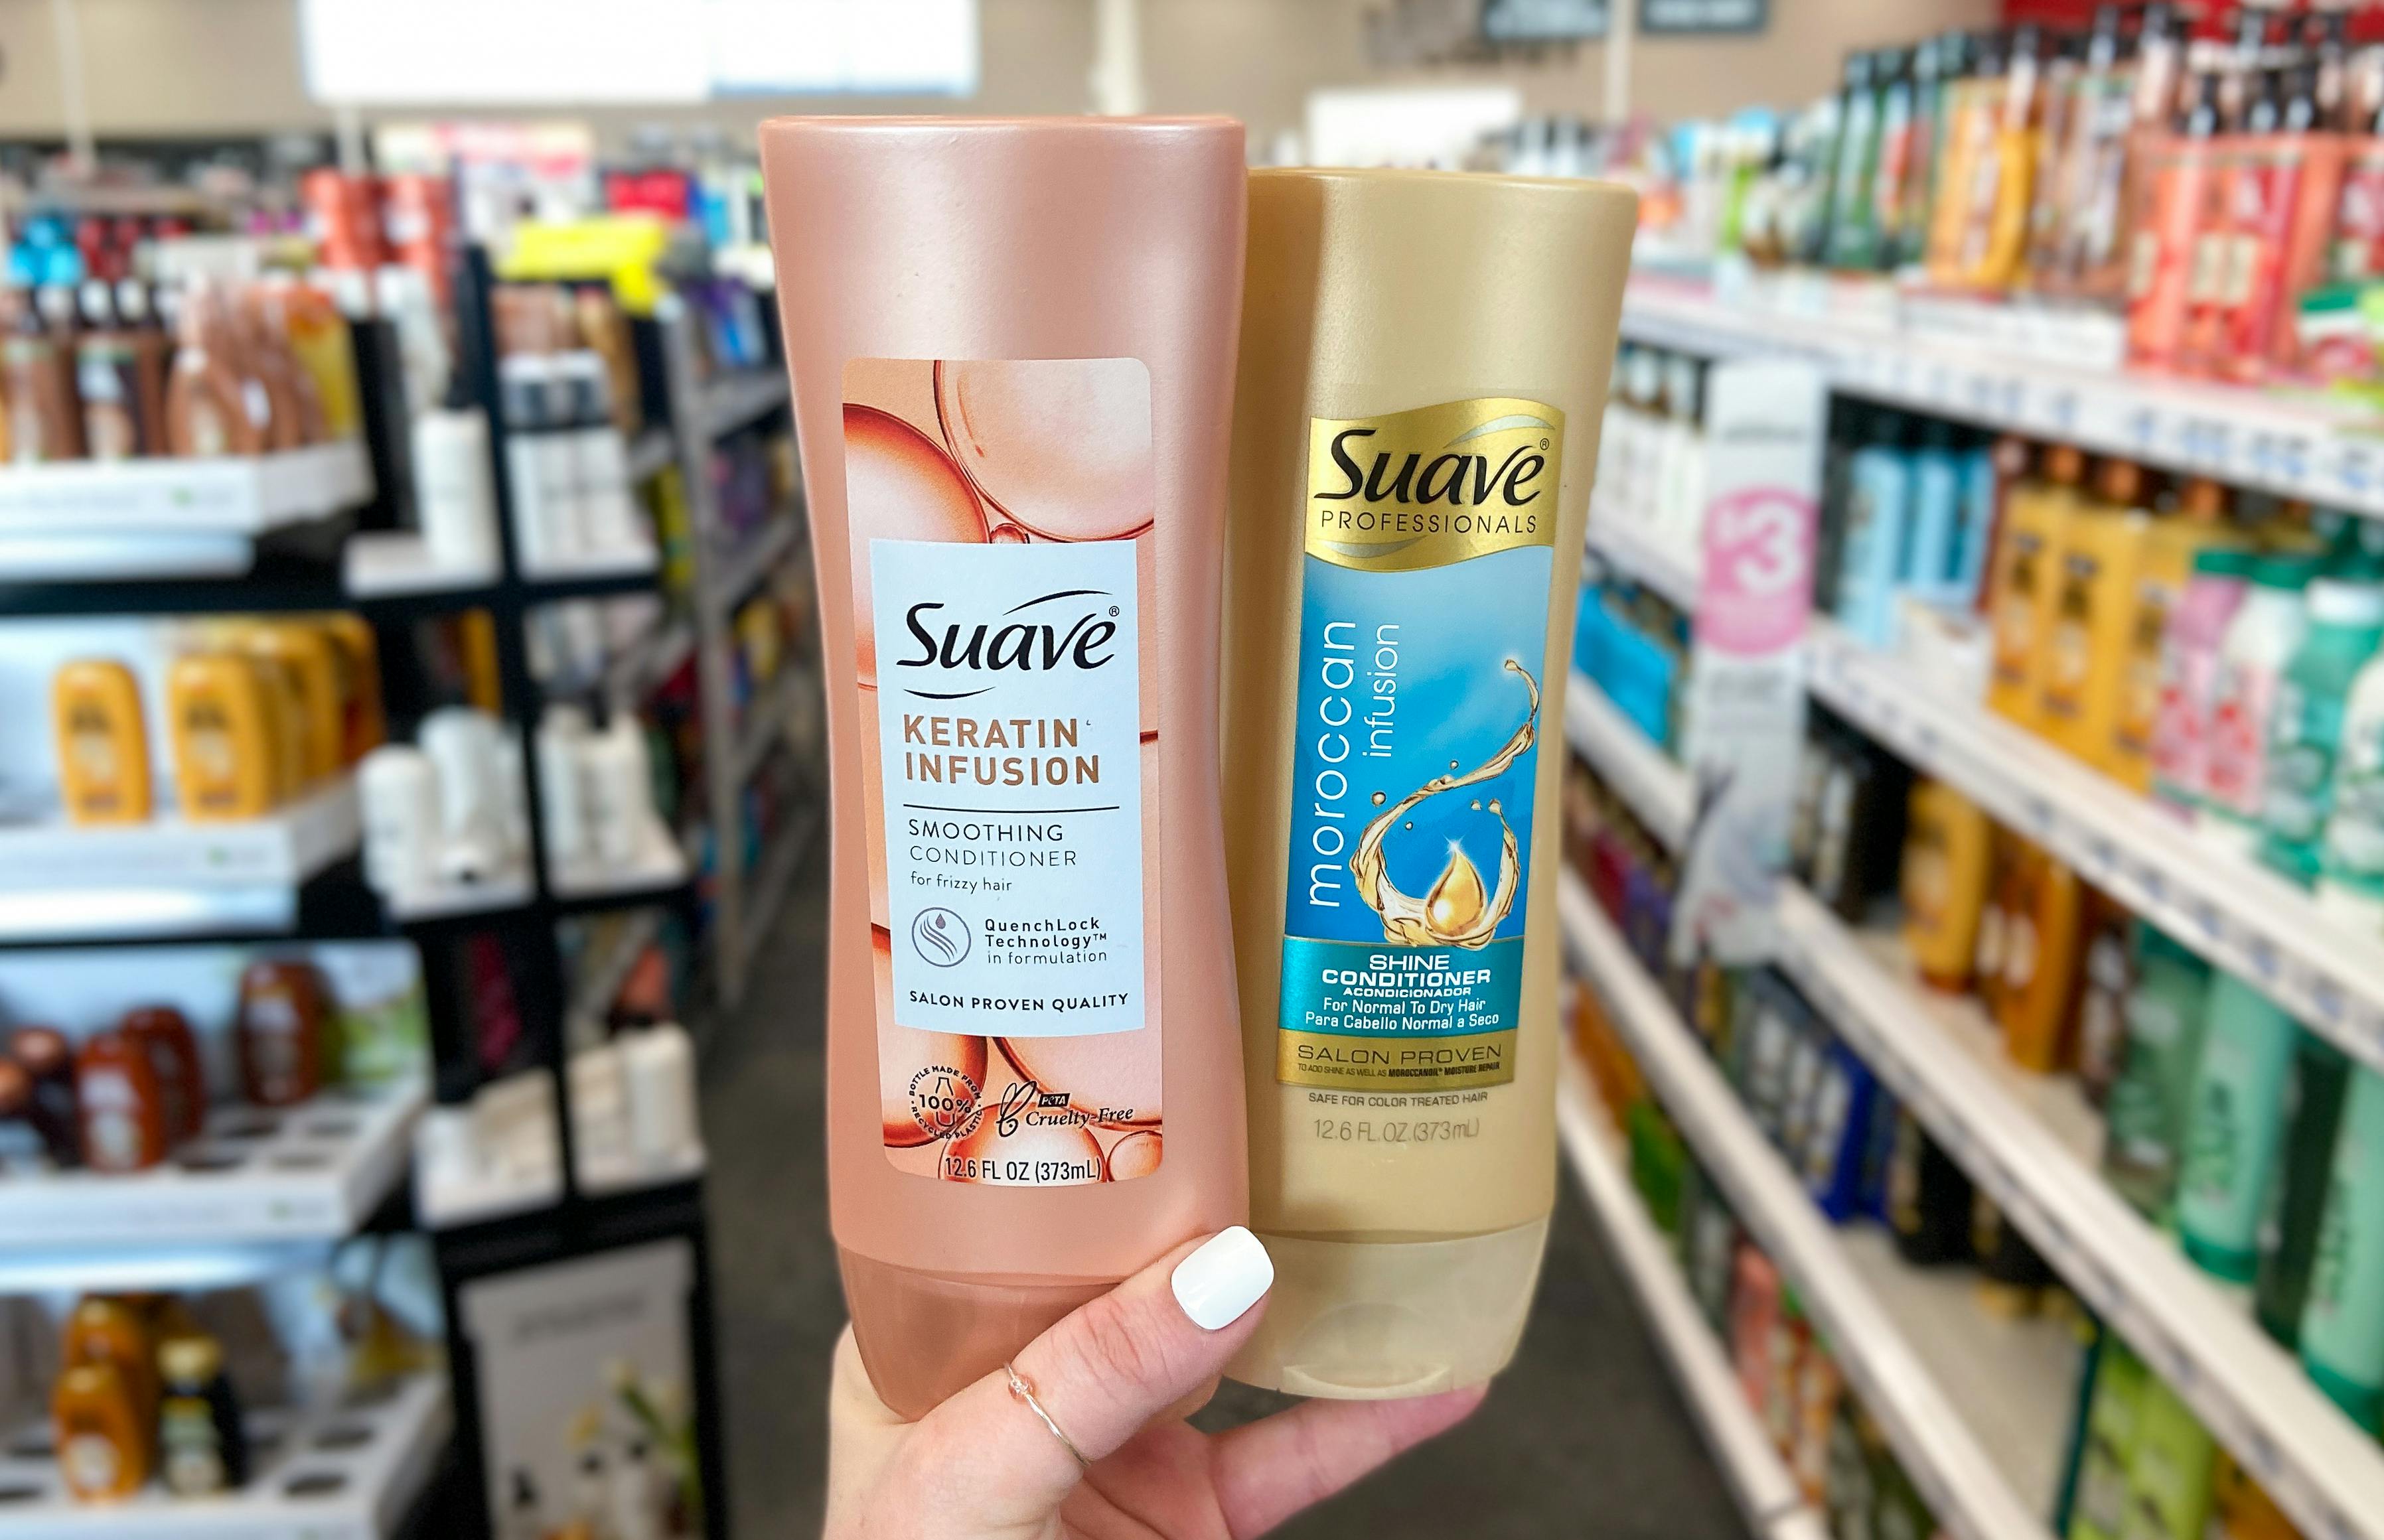 A person's hand holding up two bottles of Suave conditioner in front of an aisle in a store. One is Suave Keratin Infusion smoothing conditioner and the other is Suave Moroccan Infusion shine conditioner.